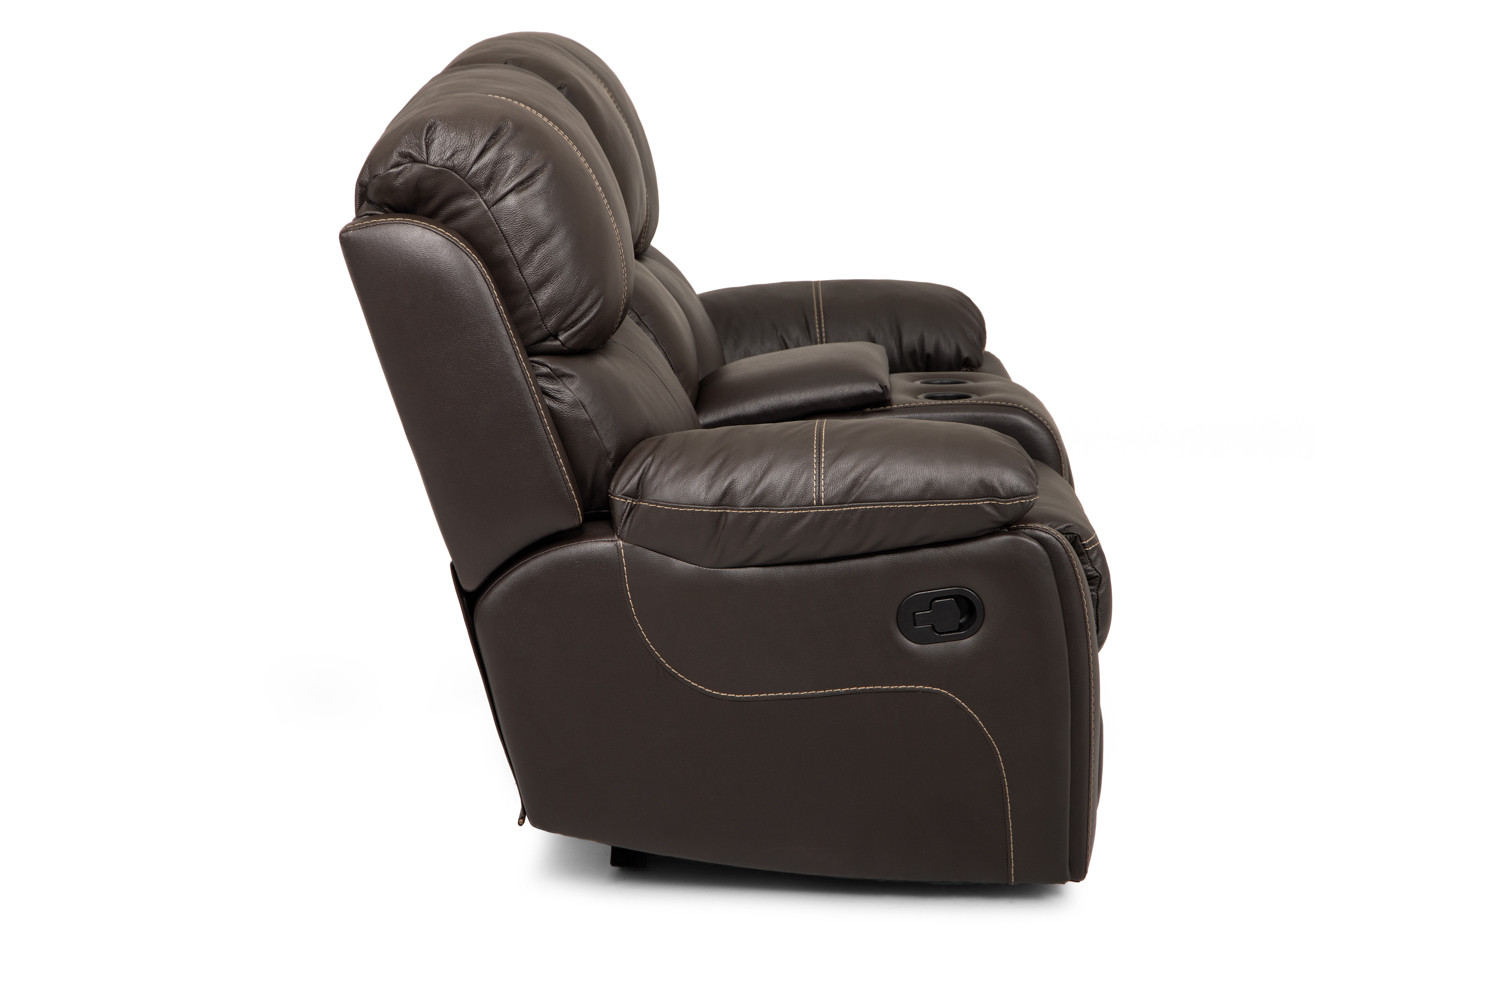 Halton 2 Seater Cinema Recliner - Mocca 2 Seater Recliners - 6